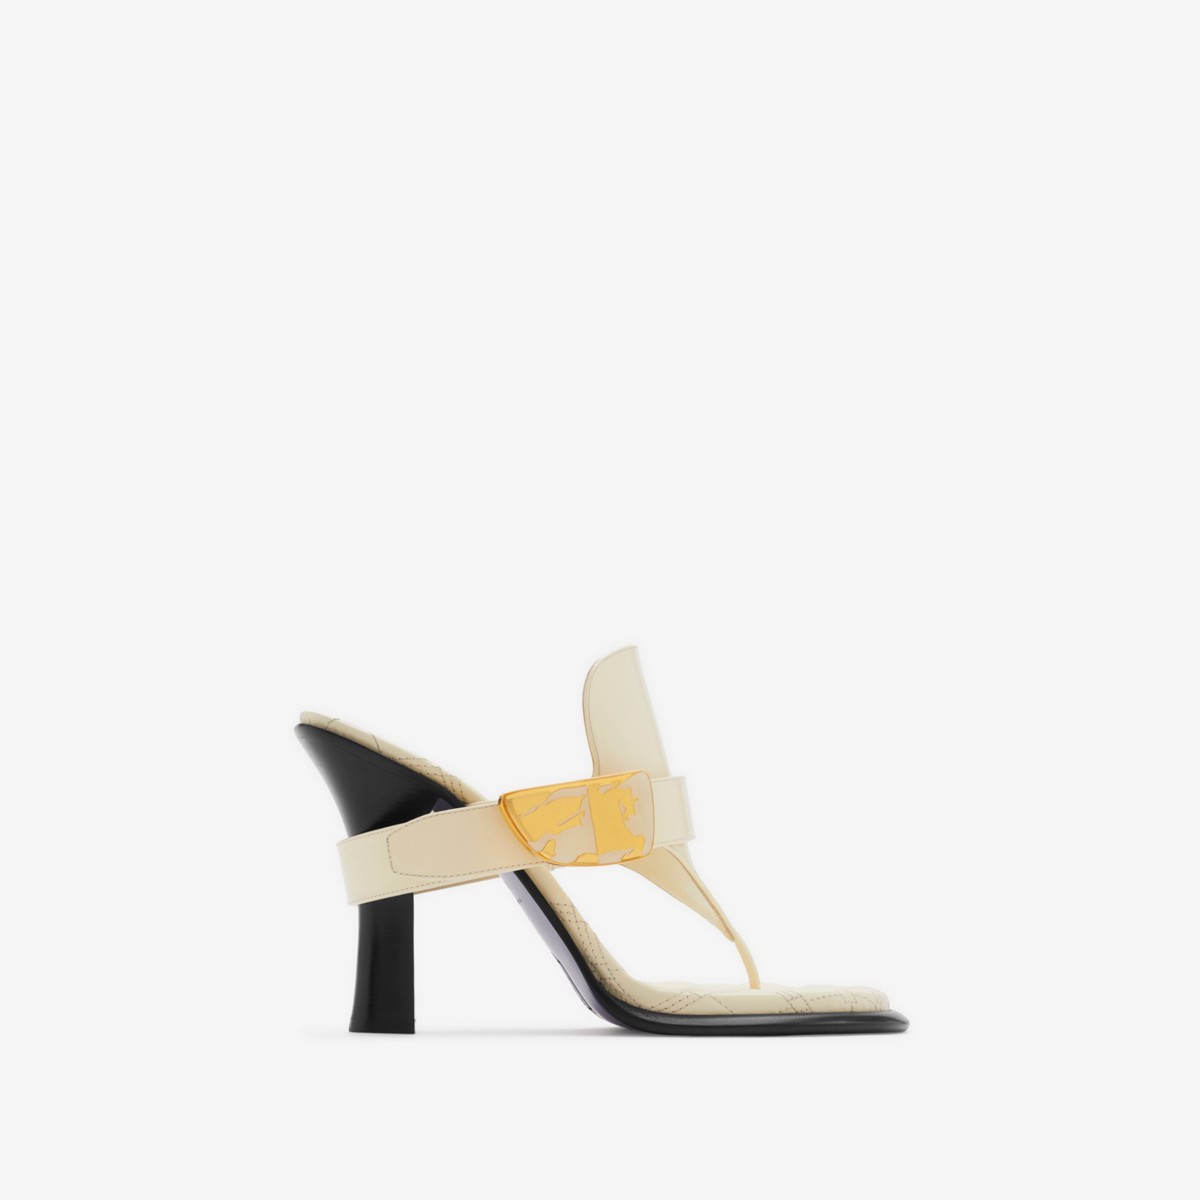 Burberry Bay 100mm Leather Sandals In Wool